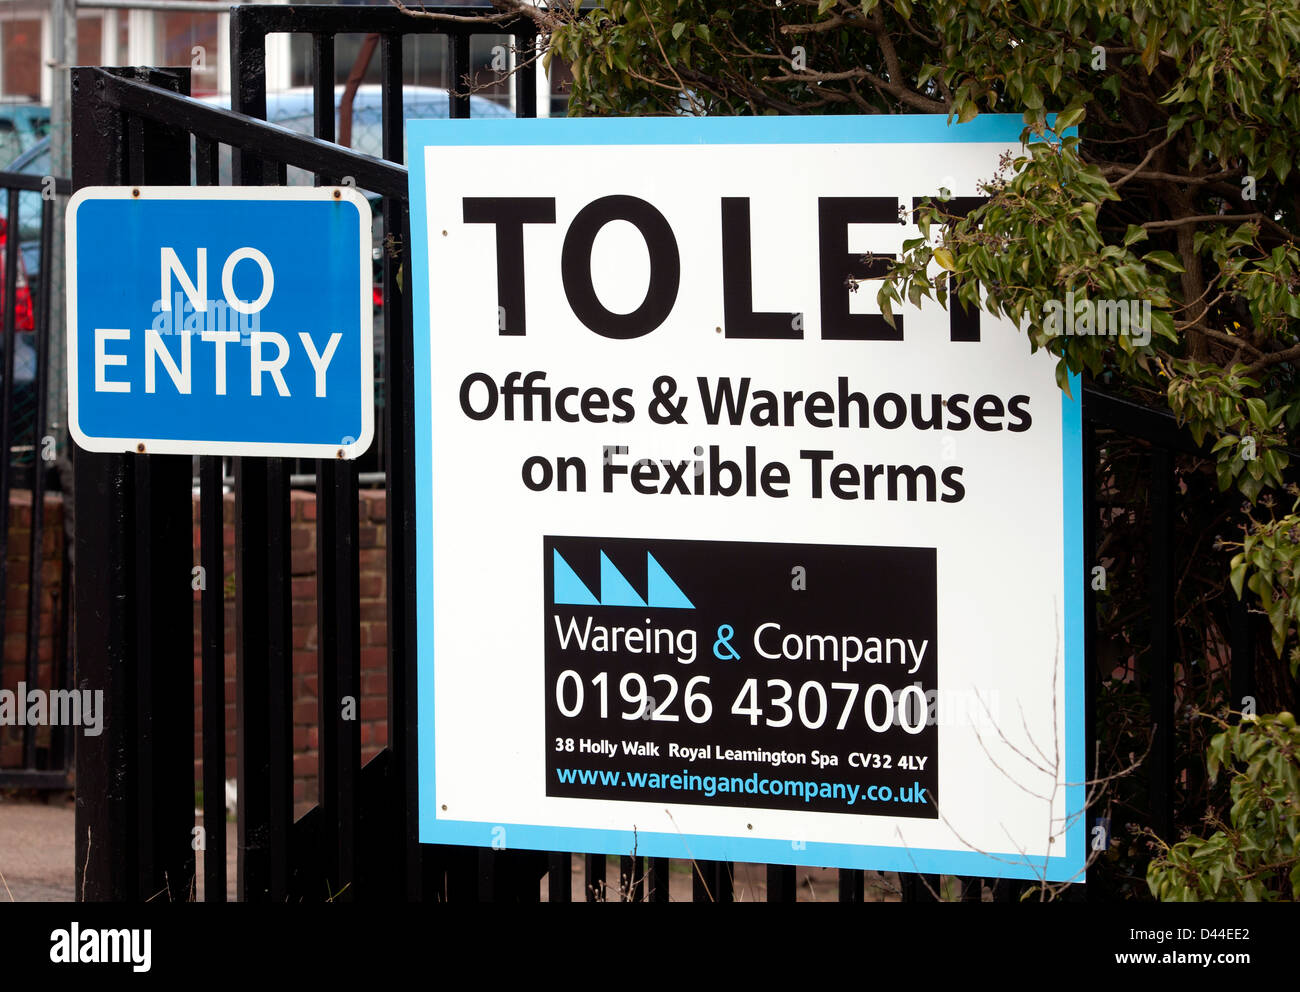 Spelling mistake on sign, Fexible instead of Flexible Stock Photo